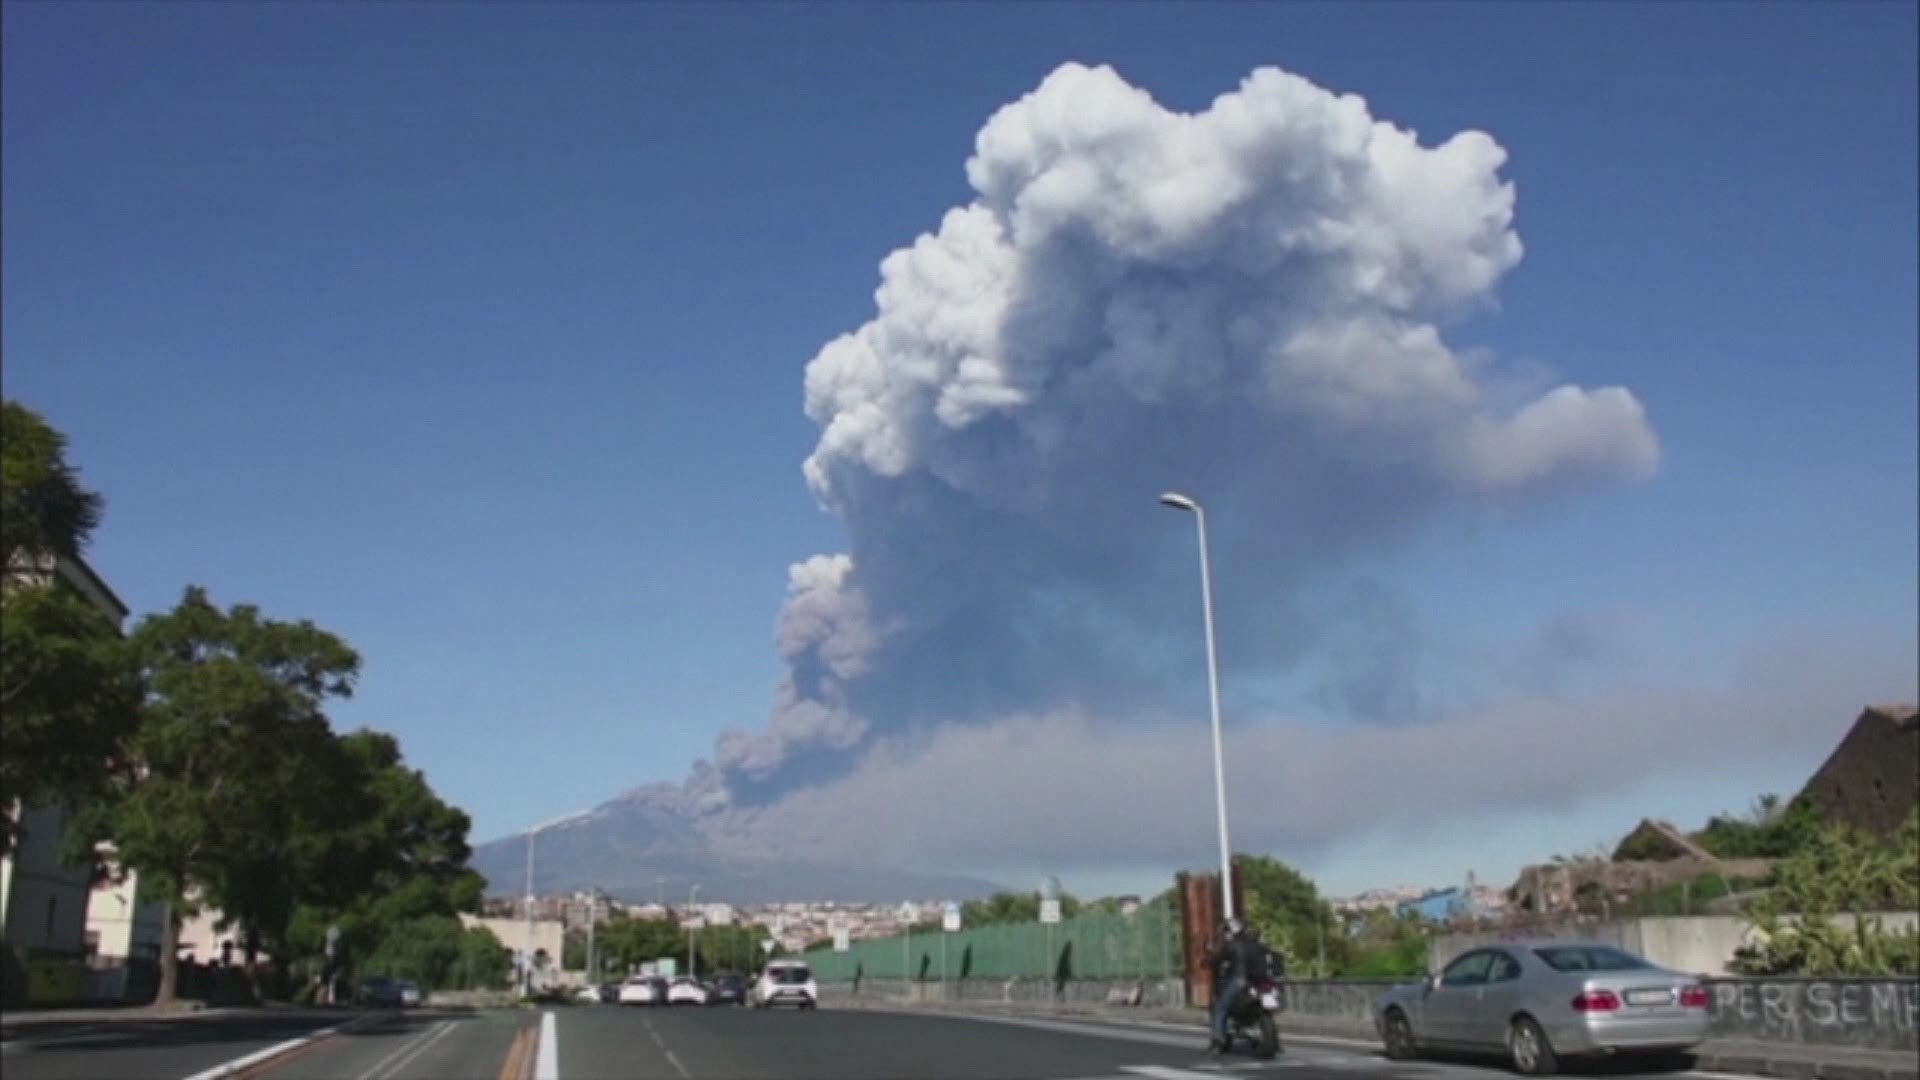 The Mount Etna observatory says lava and ash are spewing from a new fracture on the active Sicilian volcano amid an unusually high level of seismic activity.